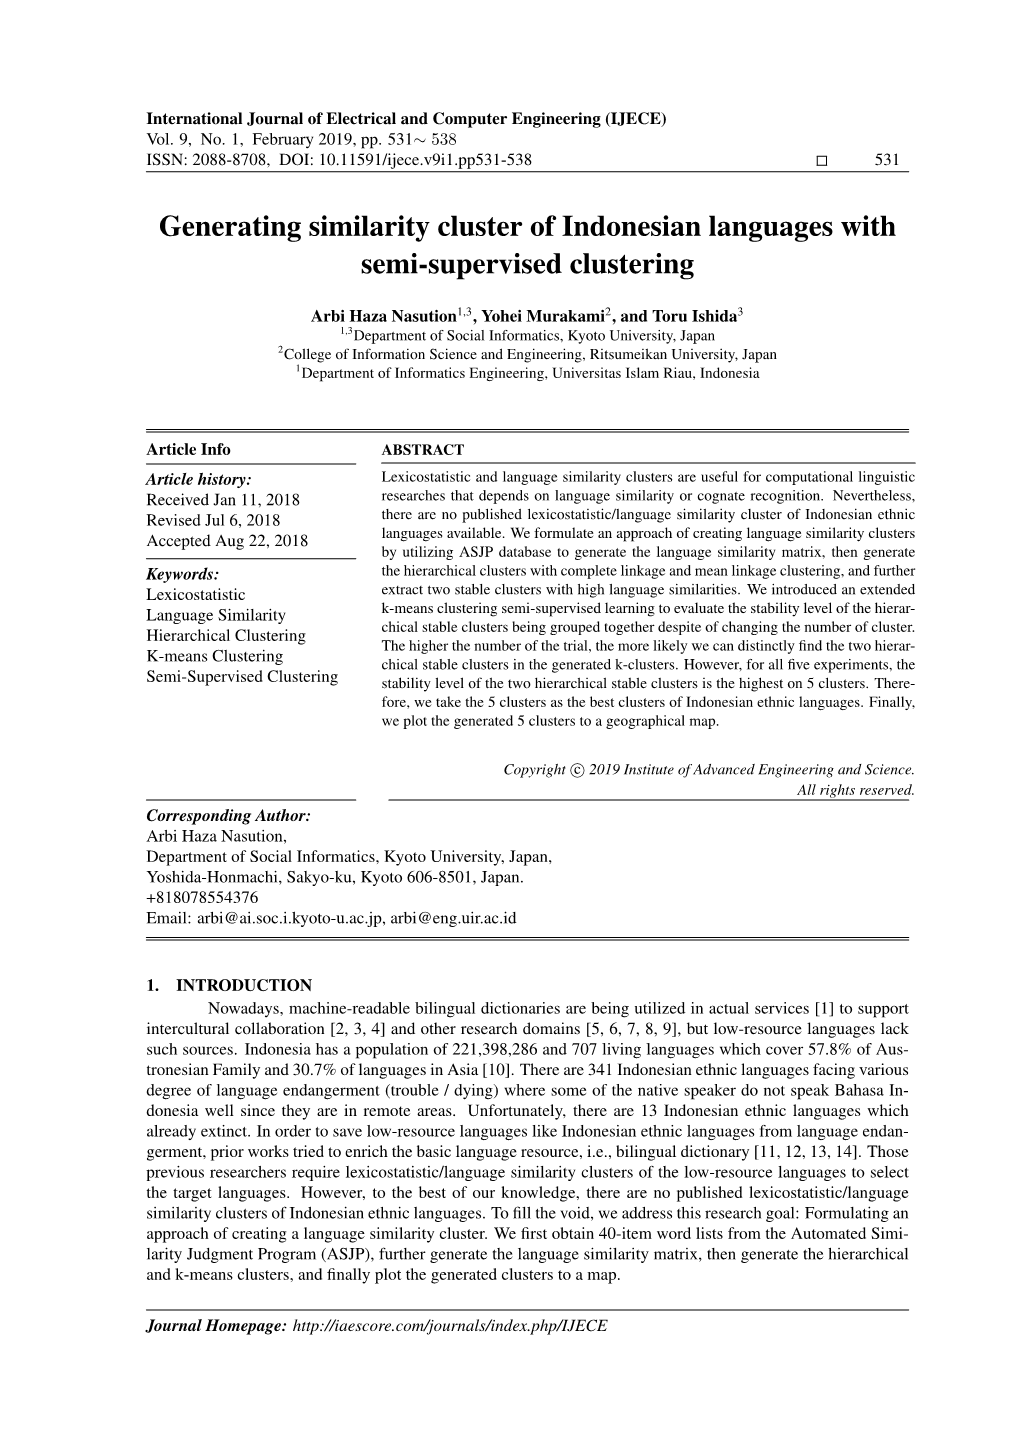 Generating Similarity Cluster of Indonesian Languages with Semi-Supervised Clustering